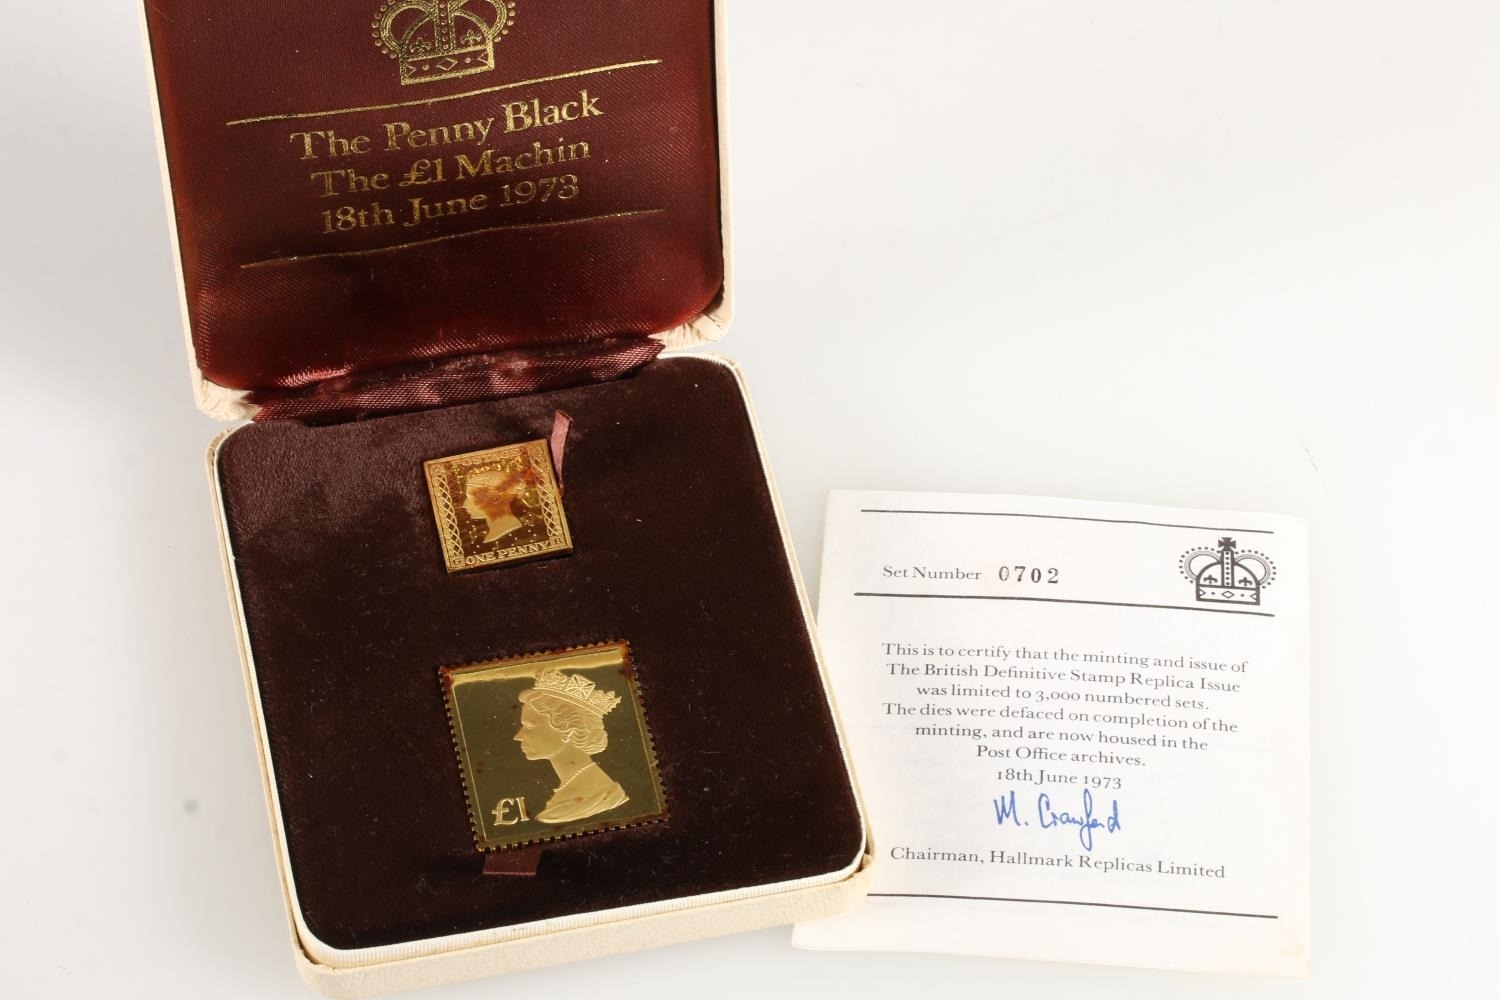 Hallmark Replicas Limited The British Definitive Stamp Replica Issue The Penny Black and The £1